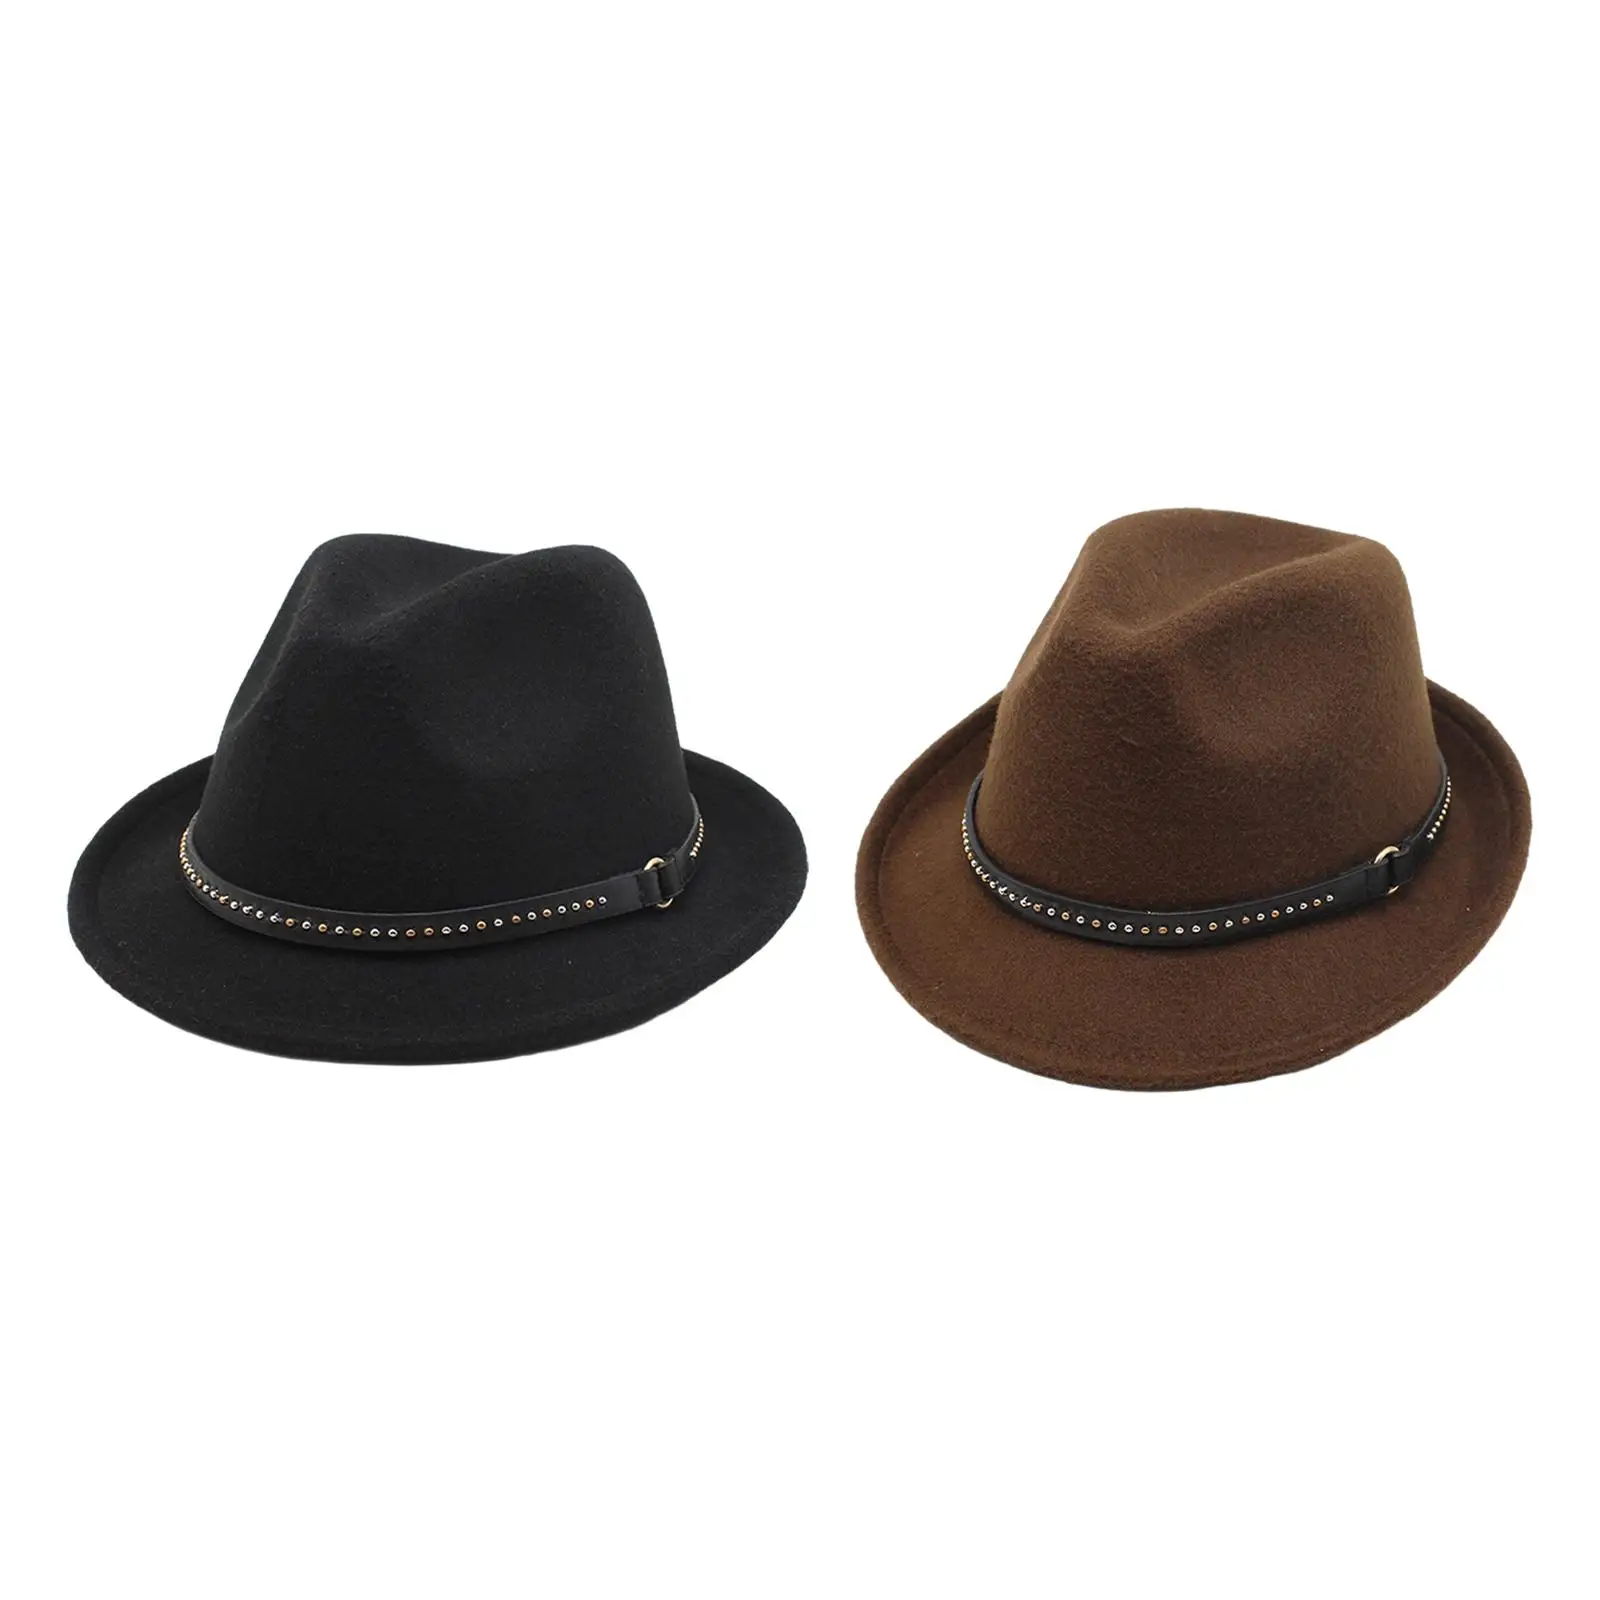 Fedora Hat Decorative Decorated Fashion Western Cowboy Hat Wide Brim Panama Hat for Stage Performance Fancy Dress Outdoor Events